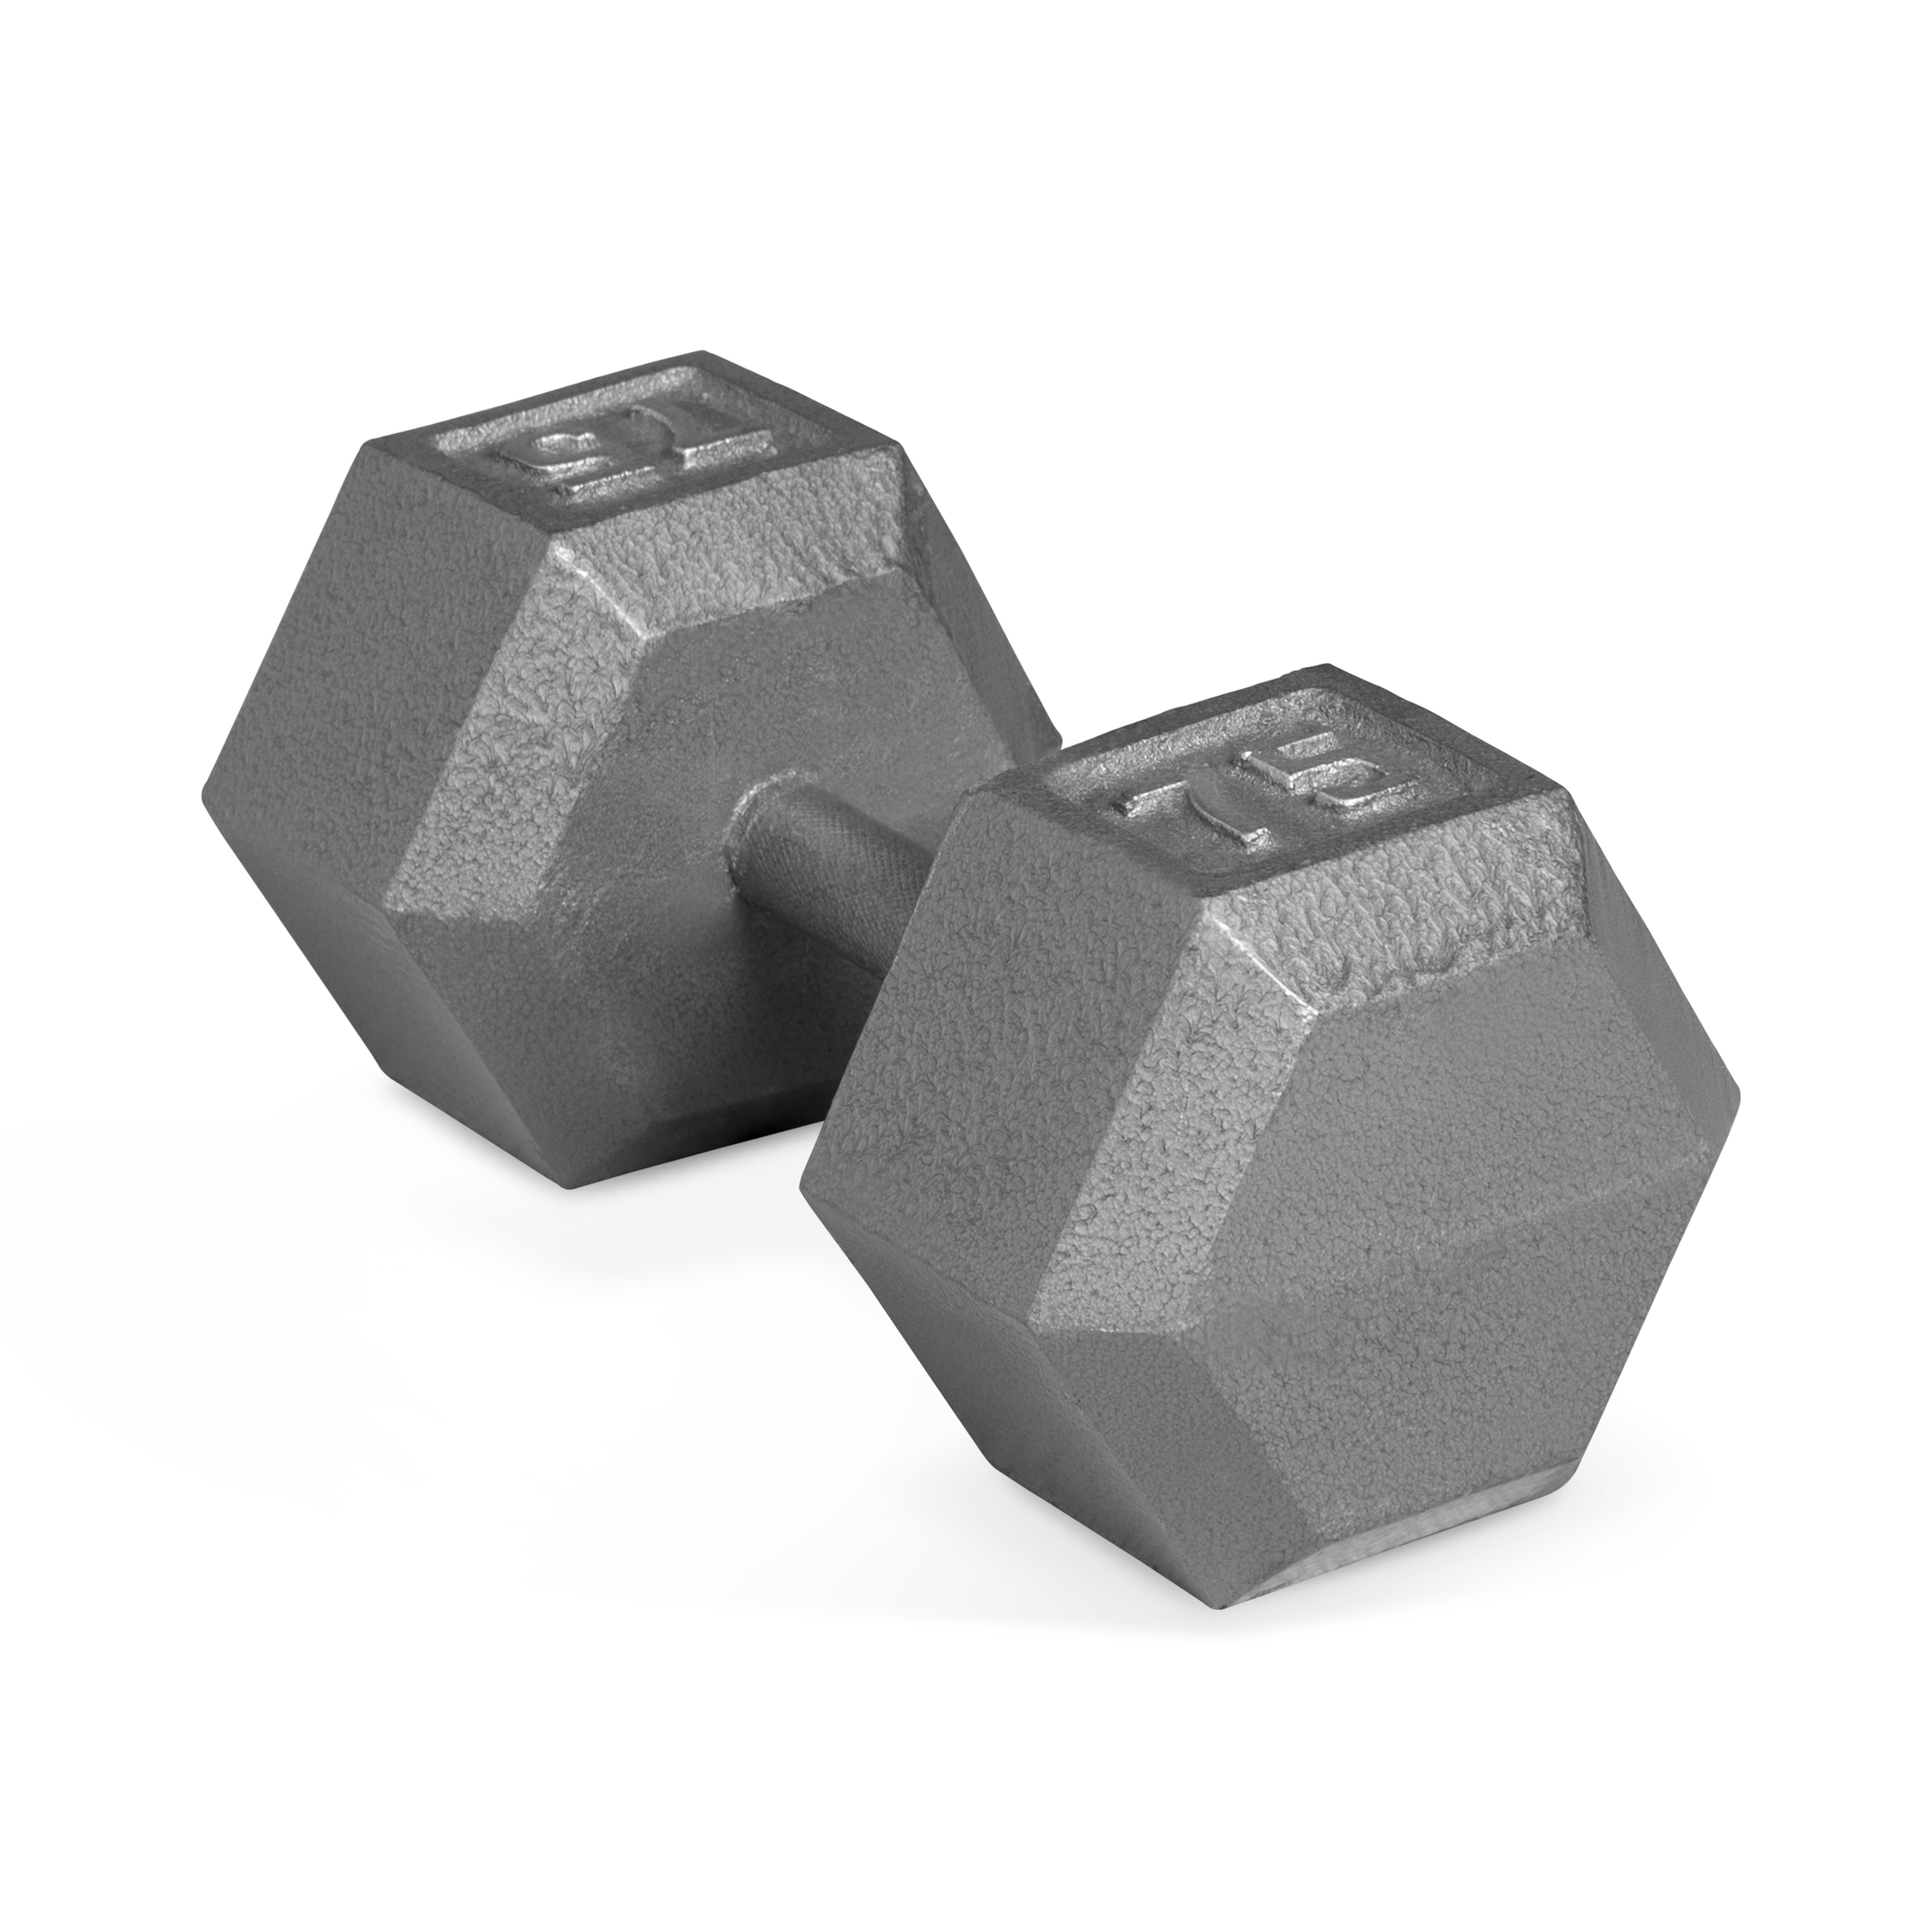 CAP Barbell 75lb Cast Iron Hex Dumbbell, Single - image 1 of 6